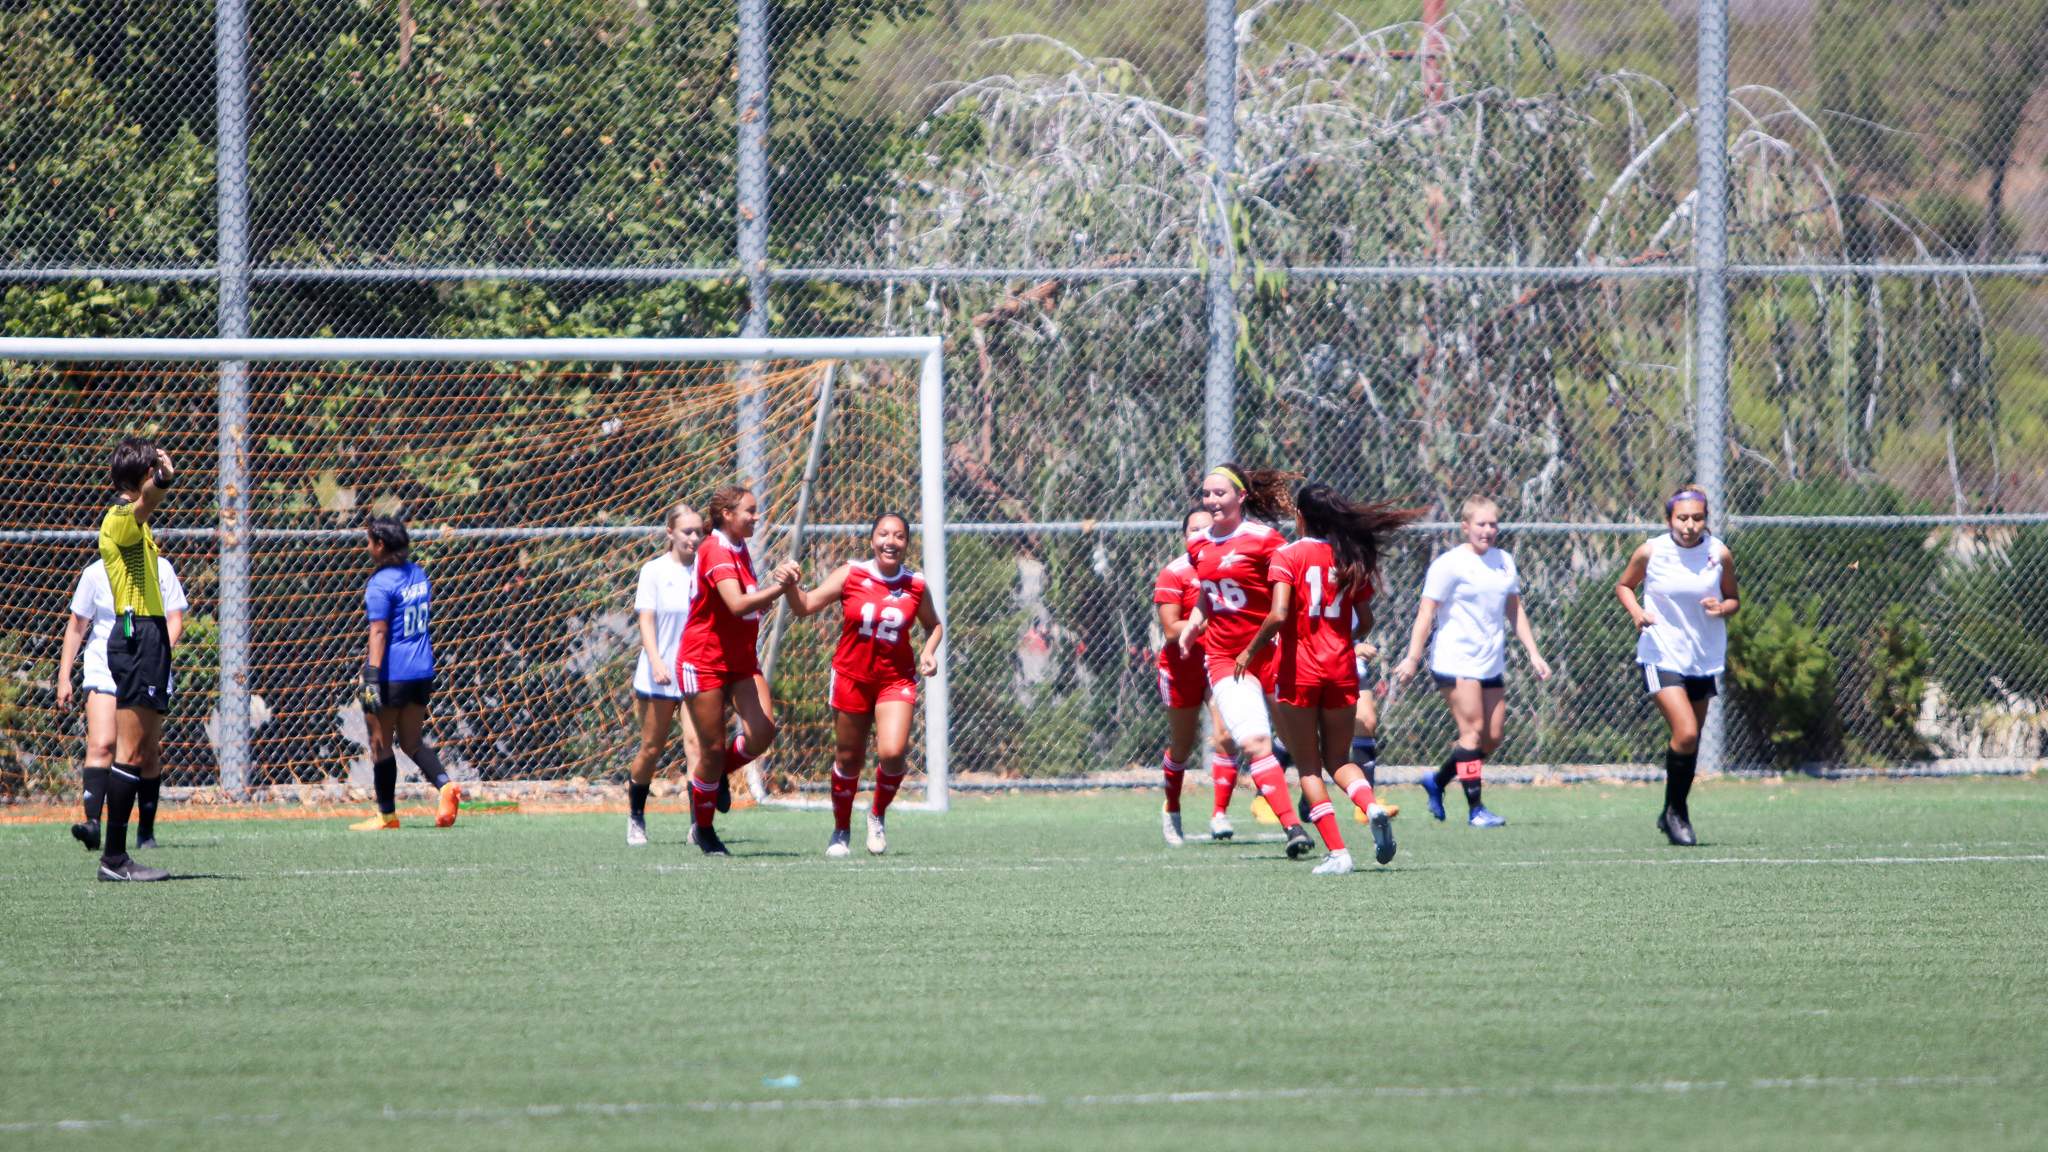 Emma Guevara (no. 12) scored the first goal of the season for the Comets. Photo by Cara Heise.